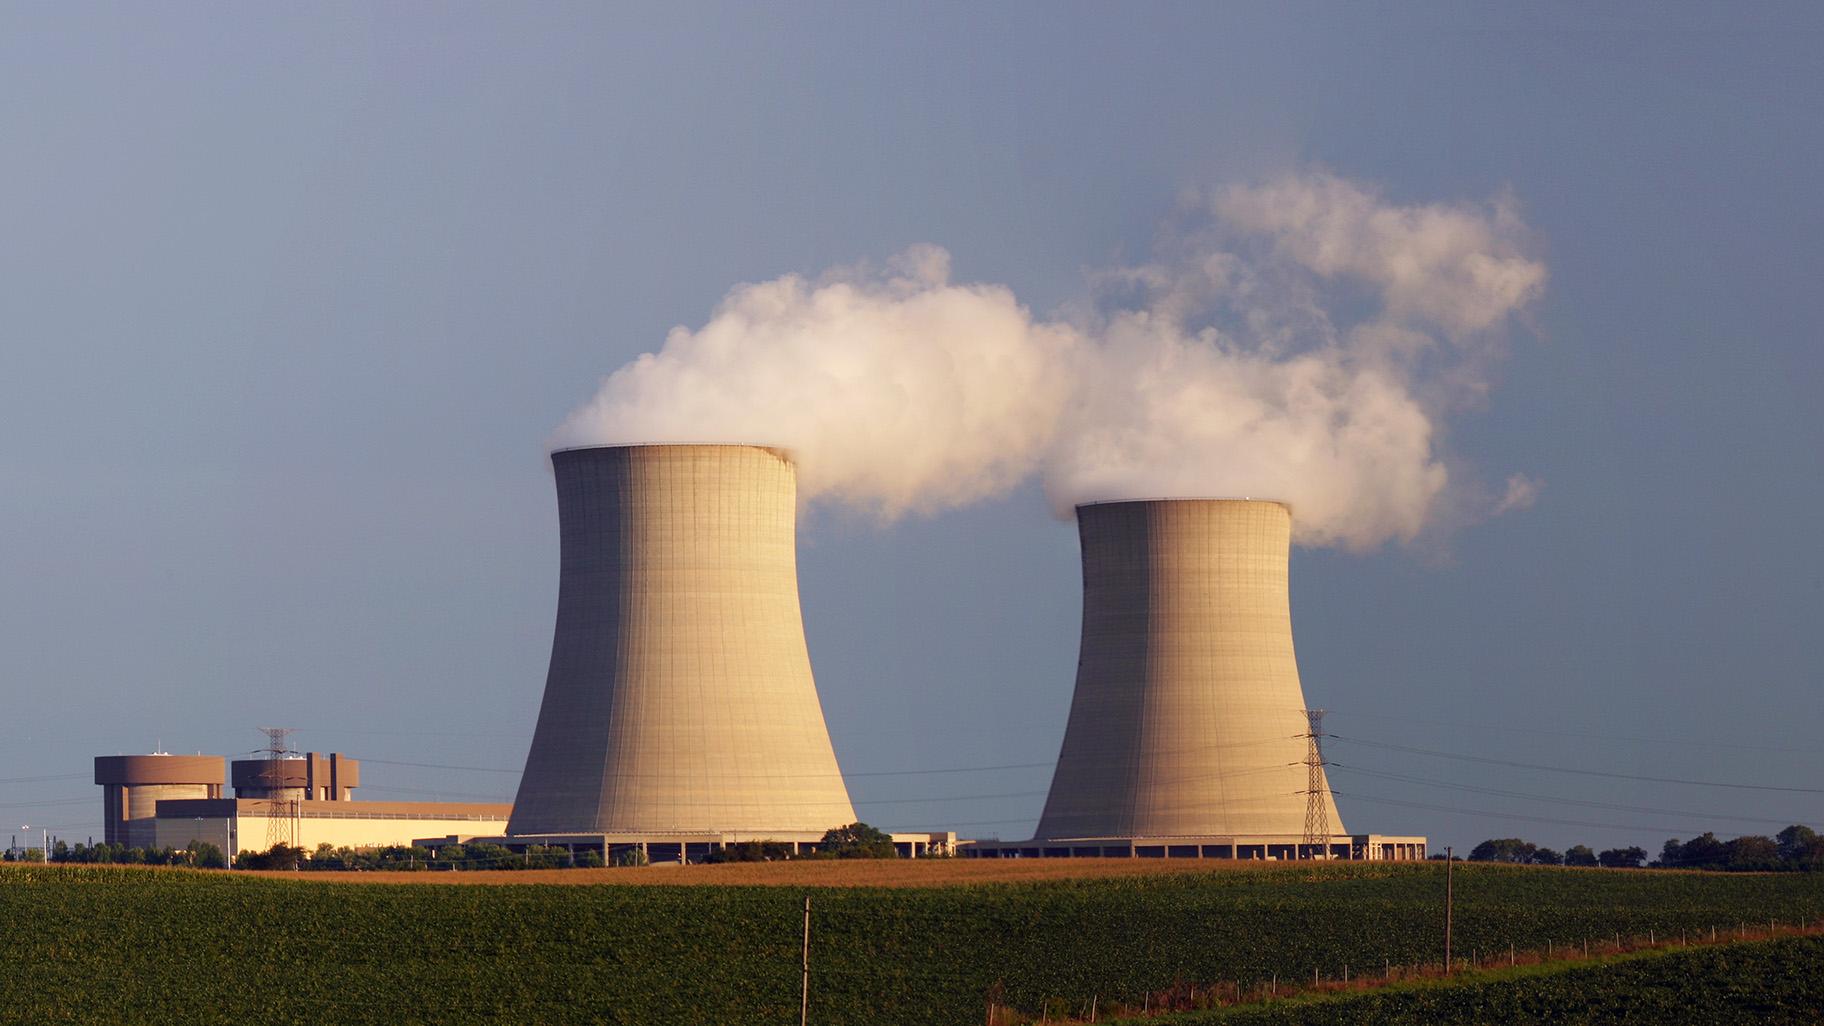 Byron Nuclear Generating Station in Ogle County, Illinois. (Christopher Peterson / Wikimedia Commons)